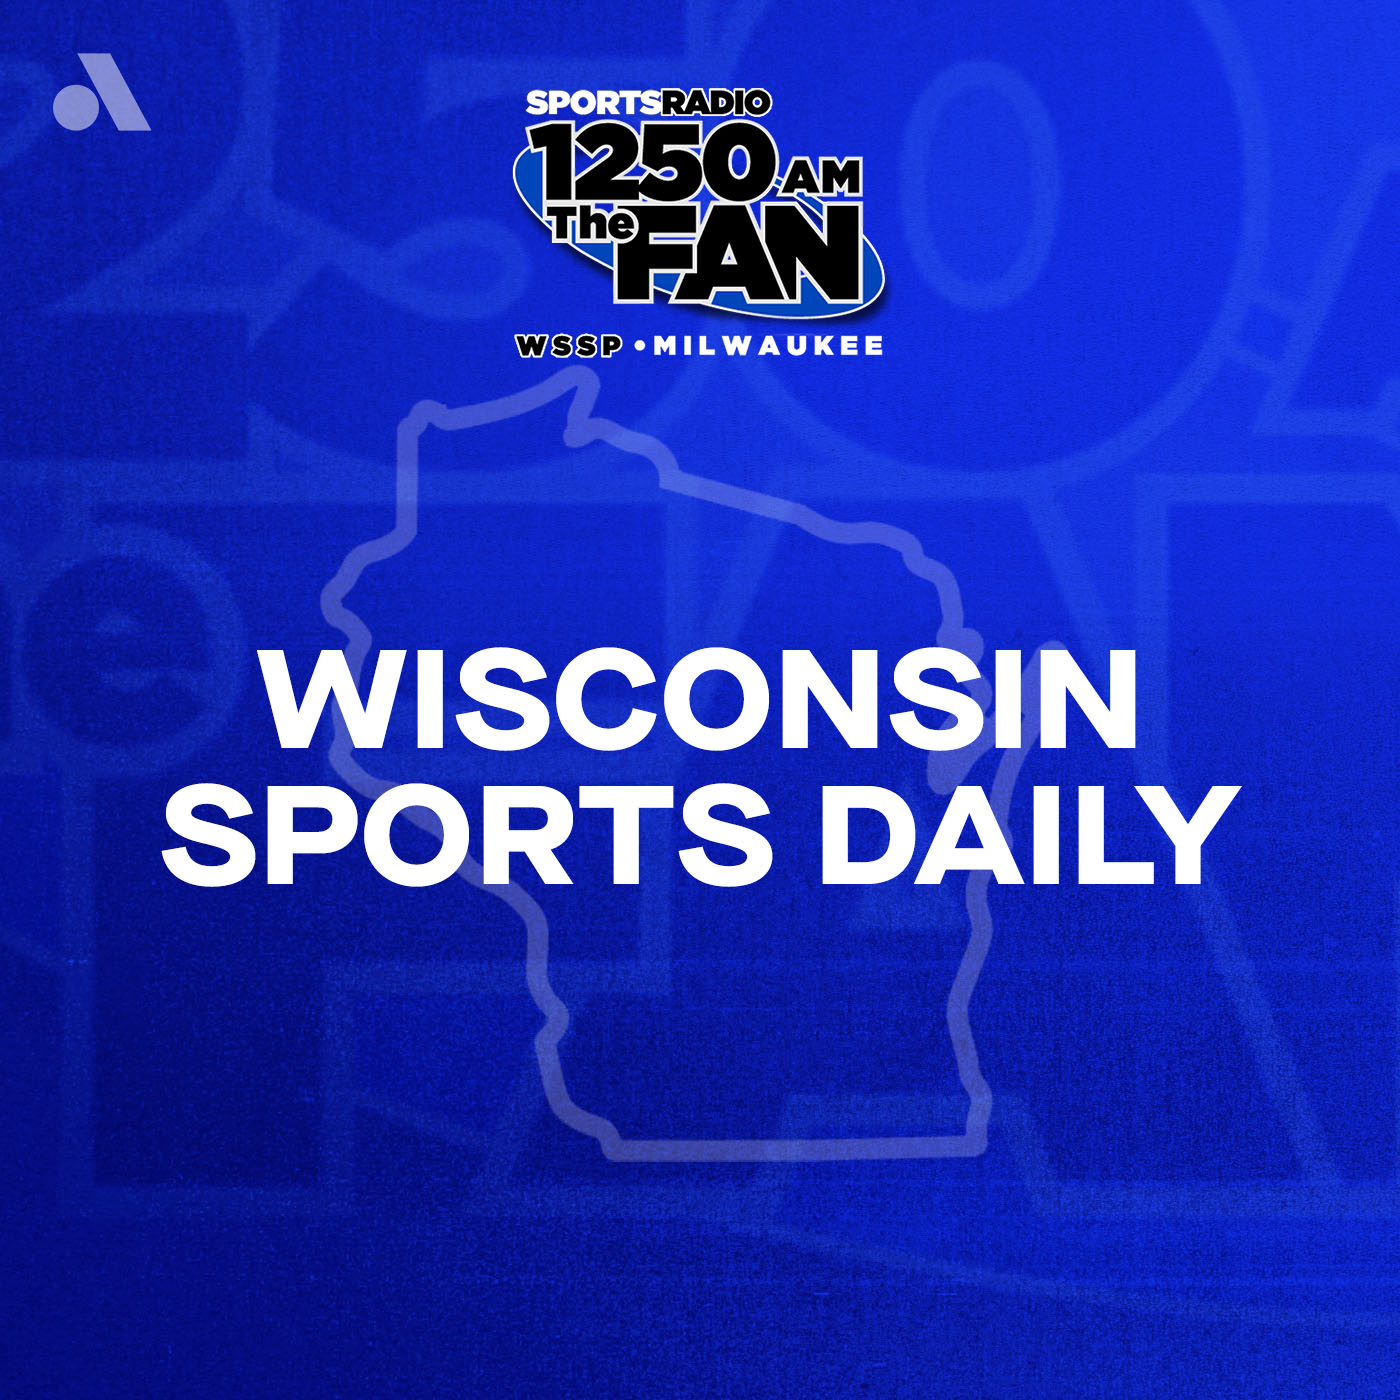 Tuesday, April 30th: Brian Baldinger of Audacy NFL Joins Wisconsin Sports Daily!